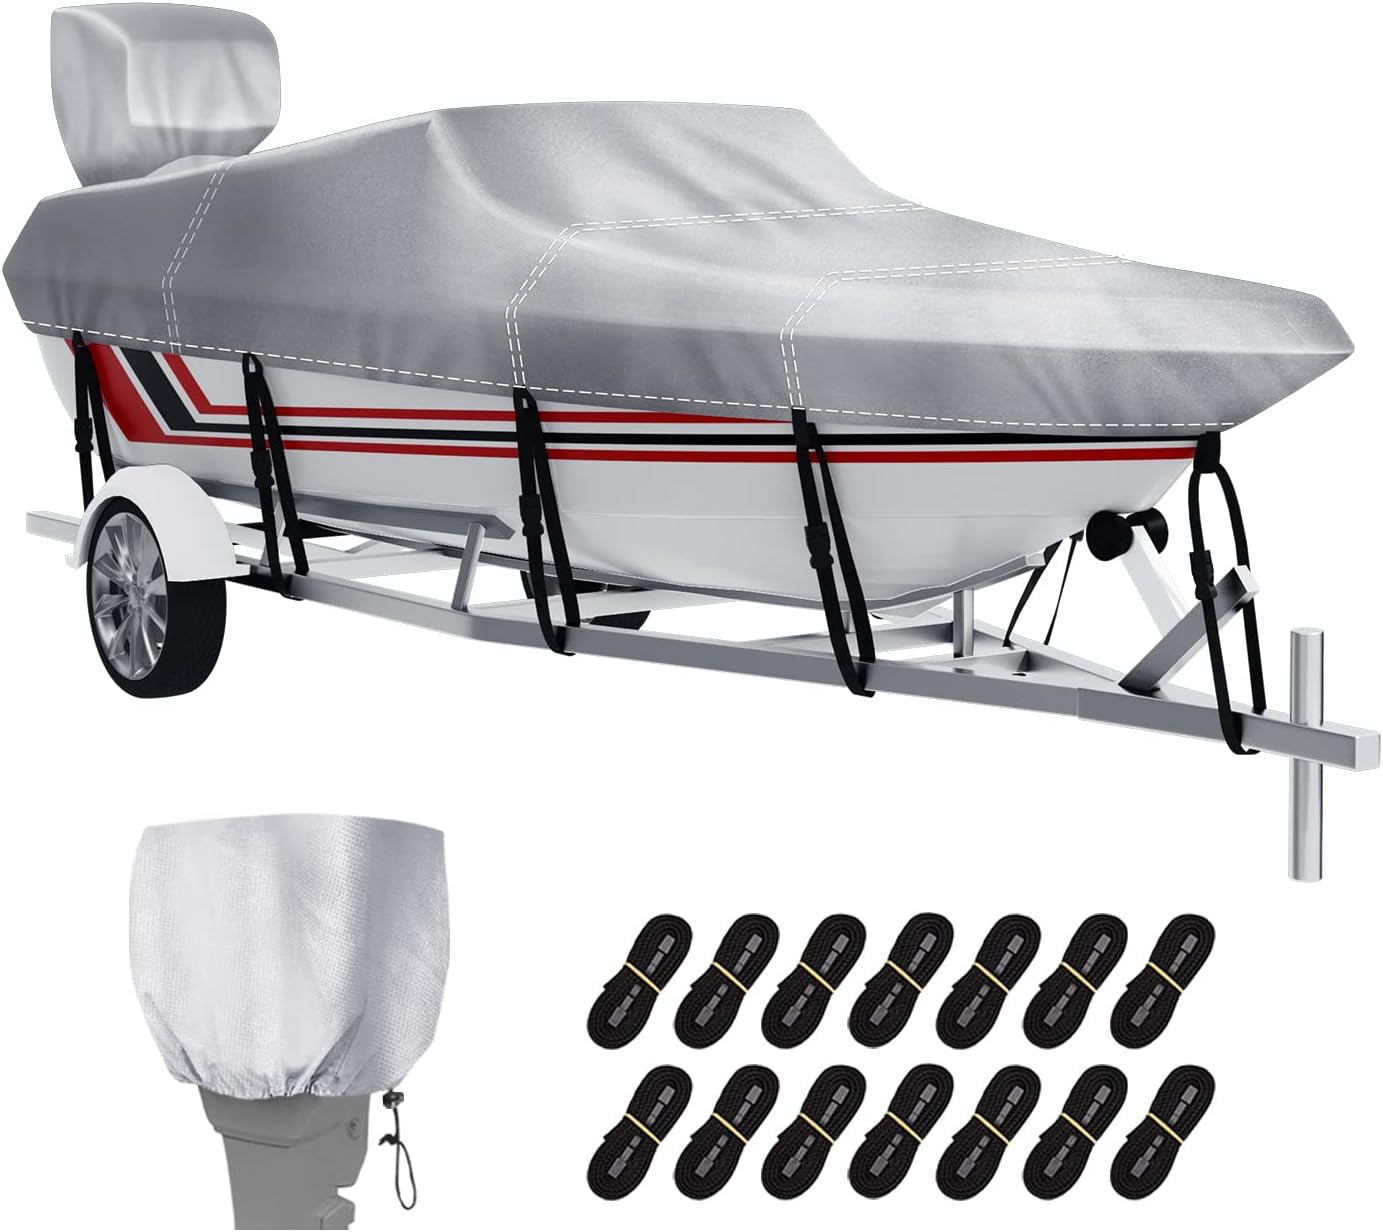 Boat Cover with Motor Cover, 12-14 Ft Heavy Duty 100% Waterproof Boat Covers Mar